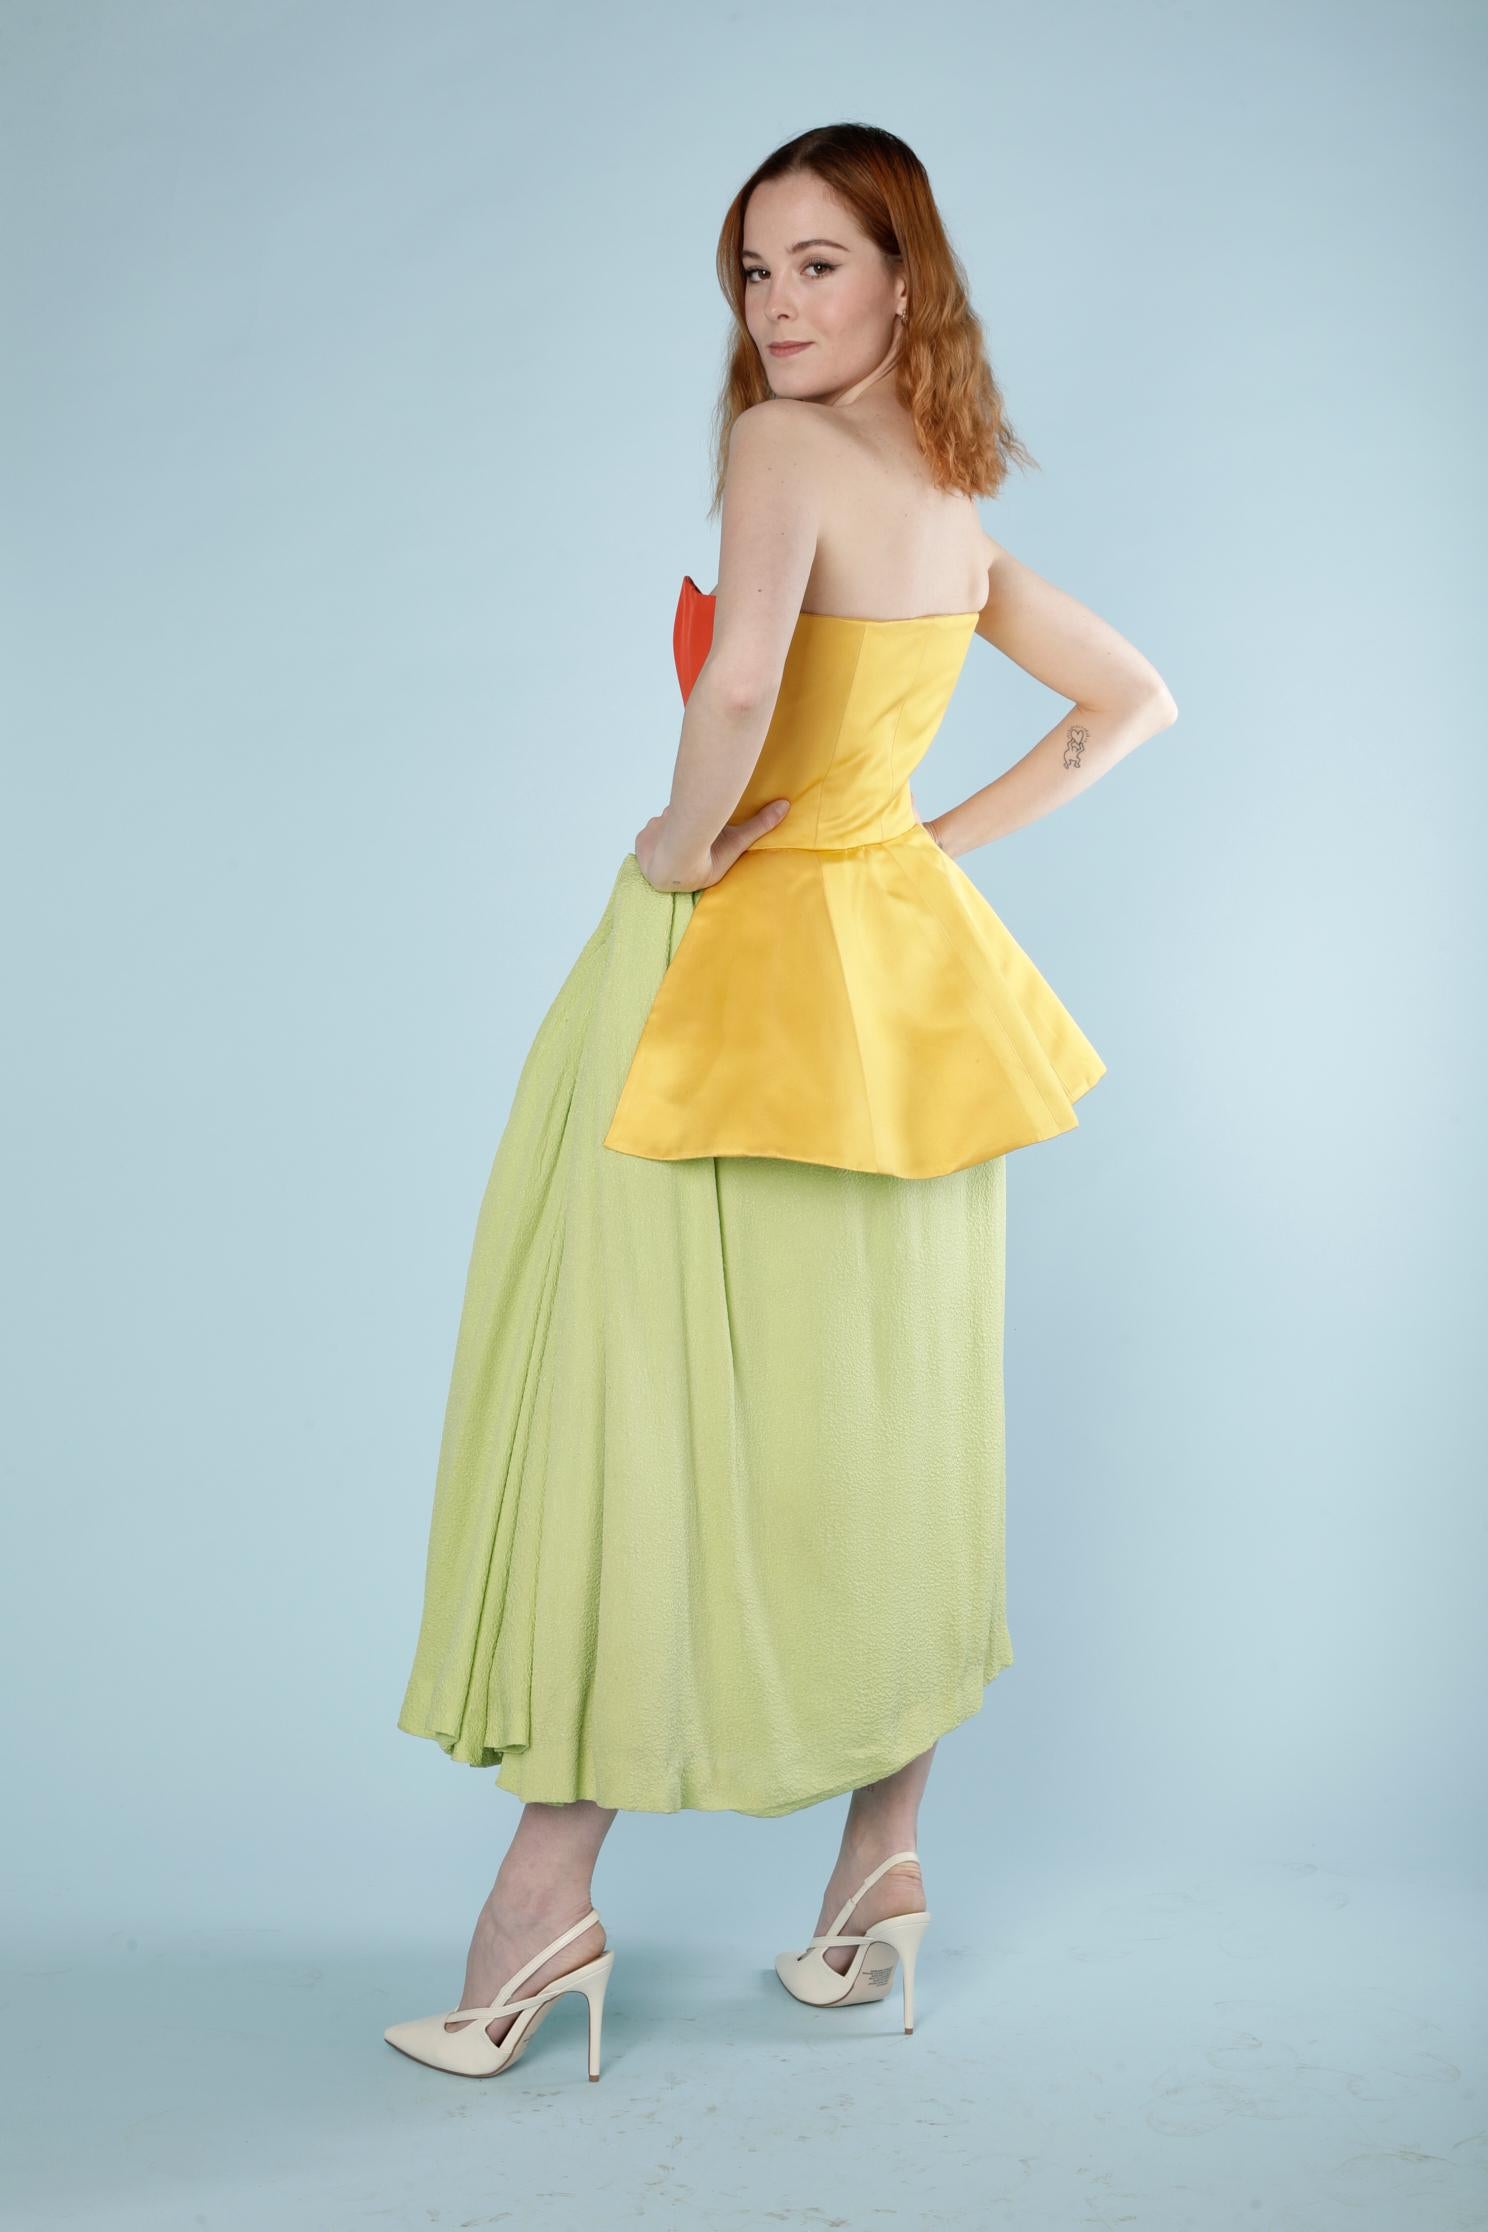 Deconstructivist Bustier evening dress orange, yellow, green and ivory silk . 
Stiff white tulle part under the skirt to keep the asymmetrical shape (green part)
SIZE S